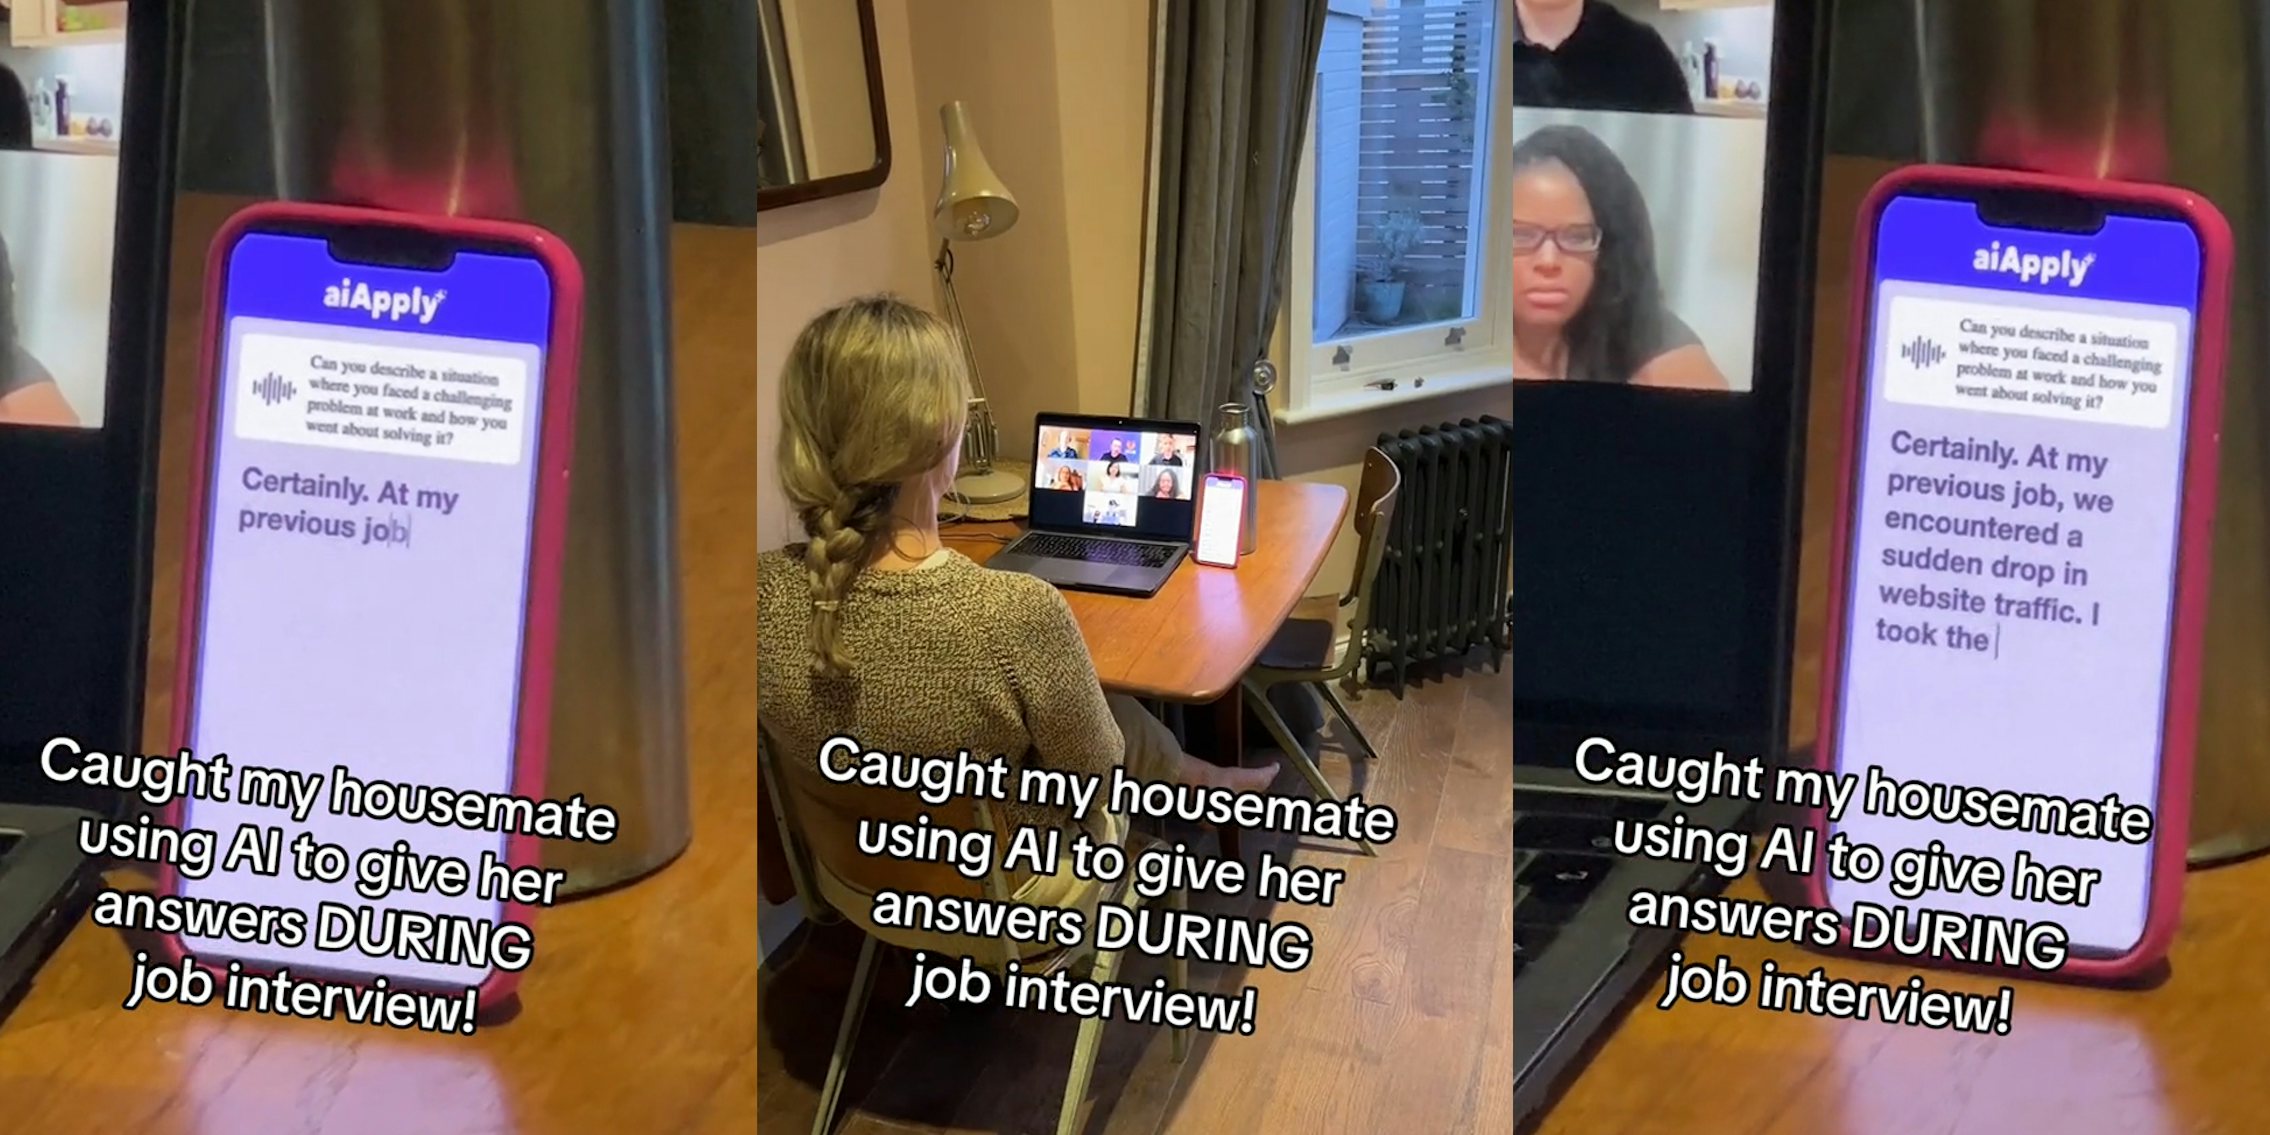 phone with aiApply on screen next to laptop during zoom job interview call with caption 'Caught my housemate using AI to give her answers DURING job interview!' (l) woman at desk with phone with aiApply on screen next to laptop during zoom job interview call with caption 'Caught my housemate using AI to give her answers DURING job interview!' (c) phone with aiApply on screen next to laptop during zoom job interview call with caption 'Caught my housemate using AI to give her answers DURING job interview!' (r)